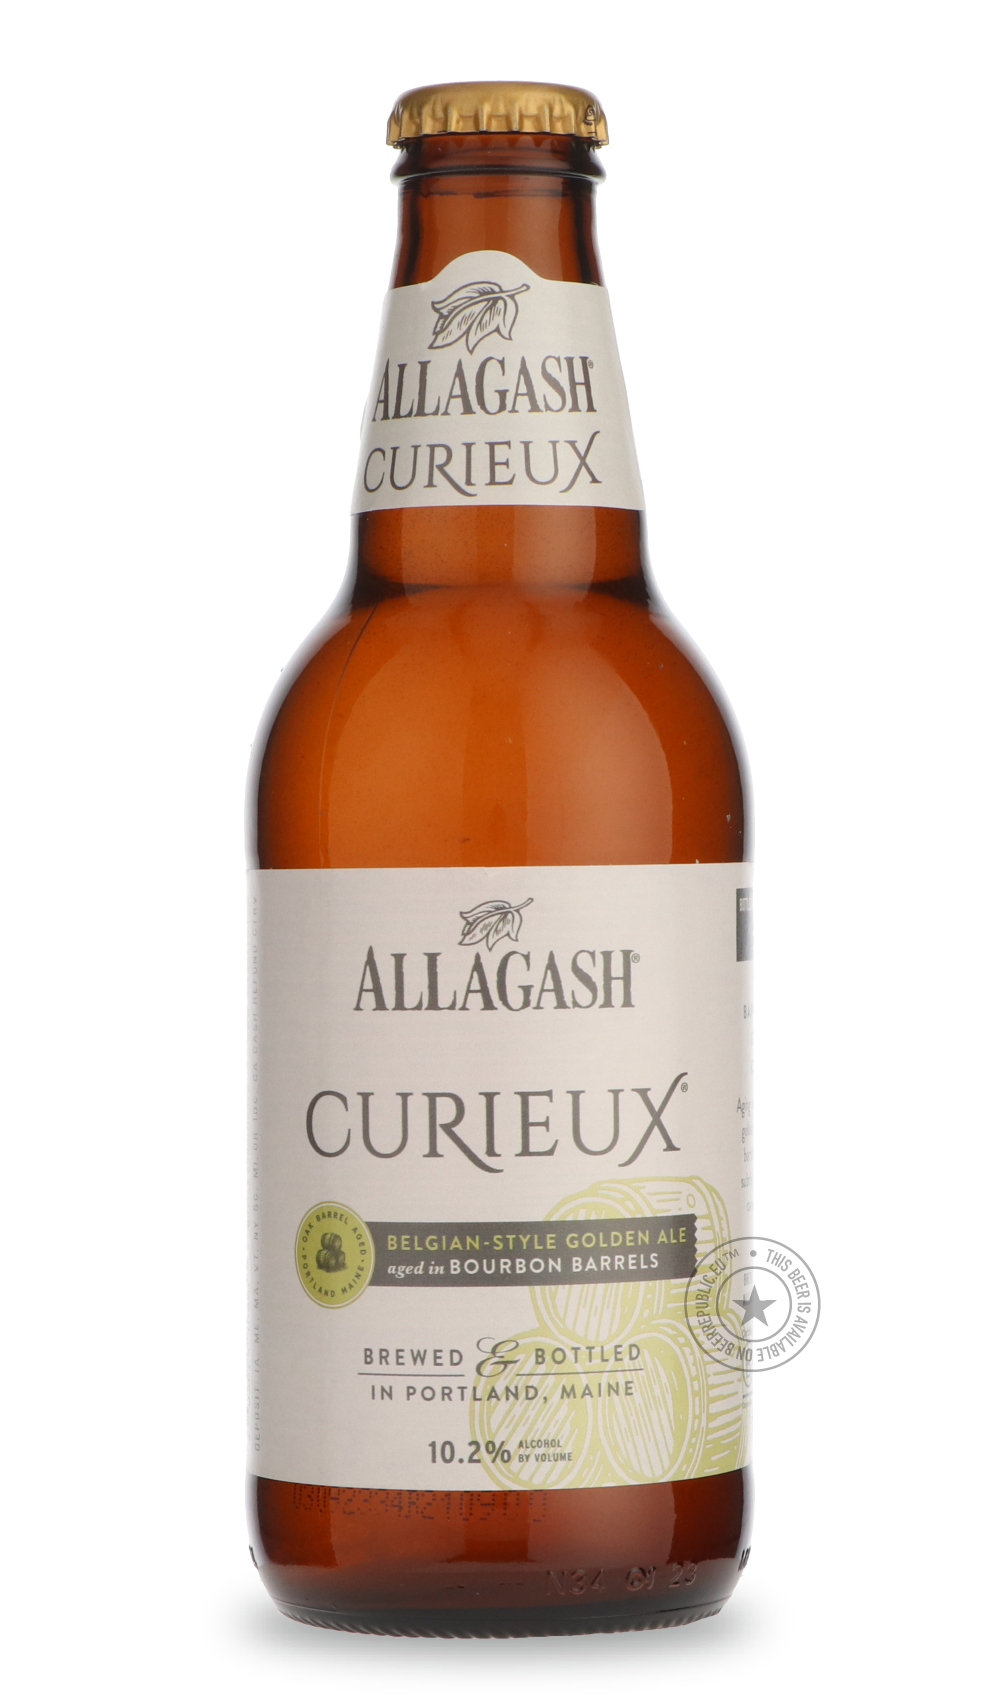 -Allagash- Curieux [355ml bottle]-Pale- Only @ Beer Republic - The best online beer store for American & Canadian craft beer - Buy beer online from the USA and Canada - Bier online kopen - Amerikaans bier kopen - Craft beer store - Craft beer kopen - Amerikanisch bier kaufen - Bier online kaufen - Acheter biere online - IPA - Stout - Porter - New England IPA - Hazy IPA - Imperial Stout - Barrel Aged - Barrel Aged Imperial Stout - Brown - Dark beer - Blond - Blonde - Pilsner - Lager - Wheat - Weizen - Amber 